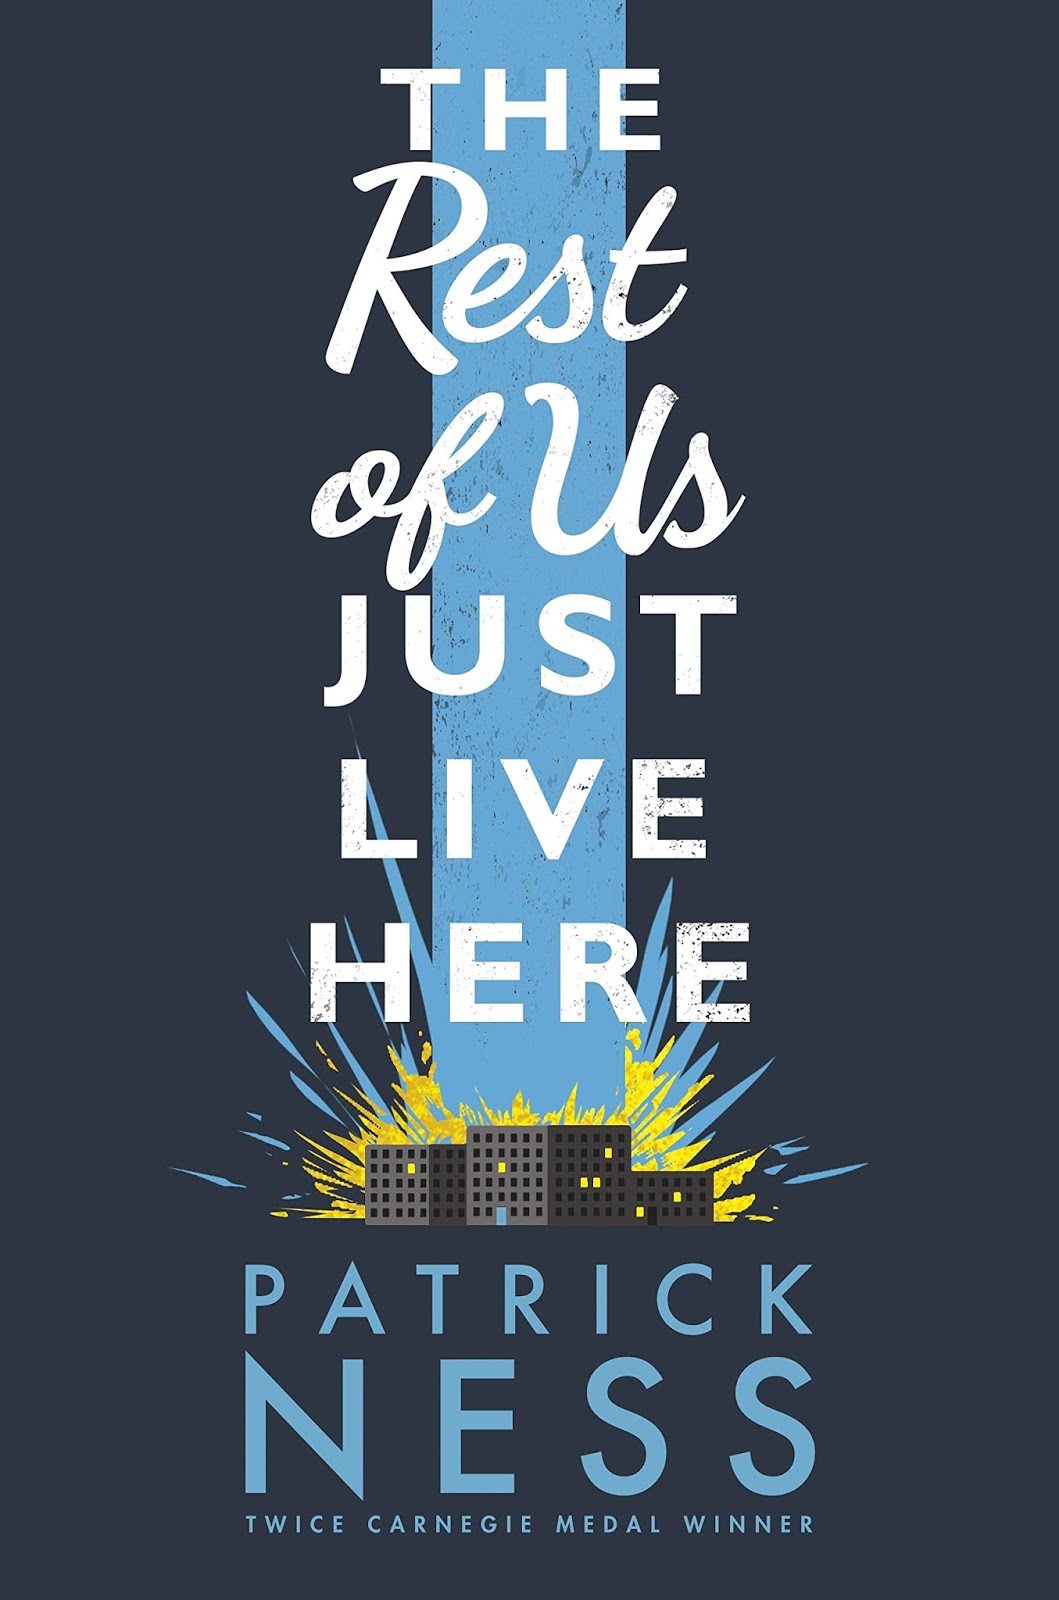 The rest of us just Live here. Patrick Ness. Just Living красива. Rest. Who live here